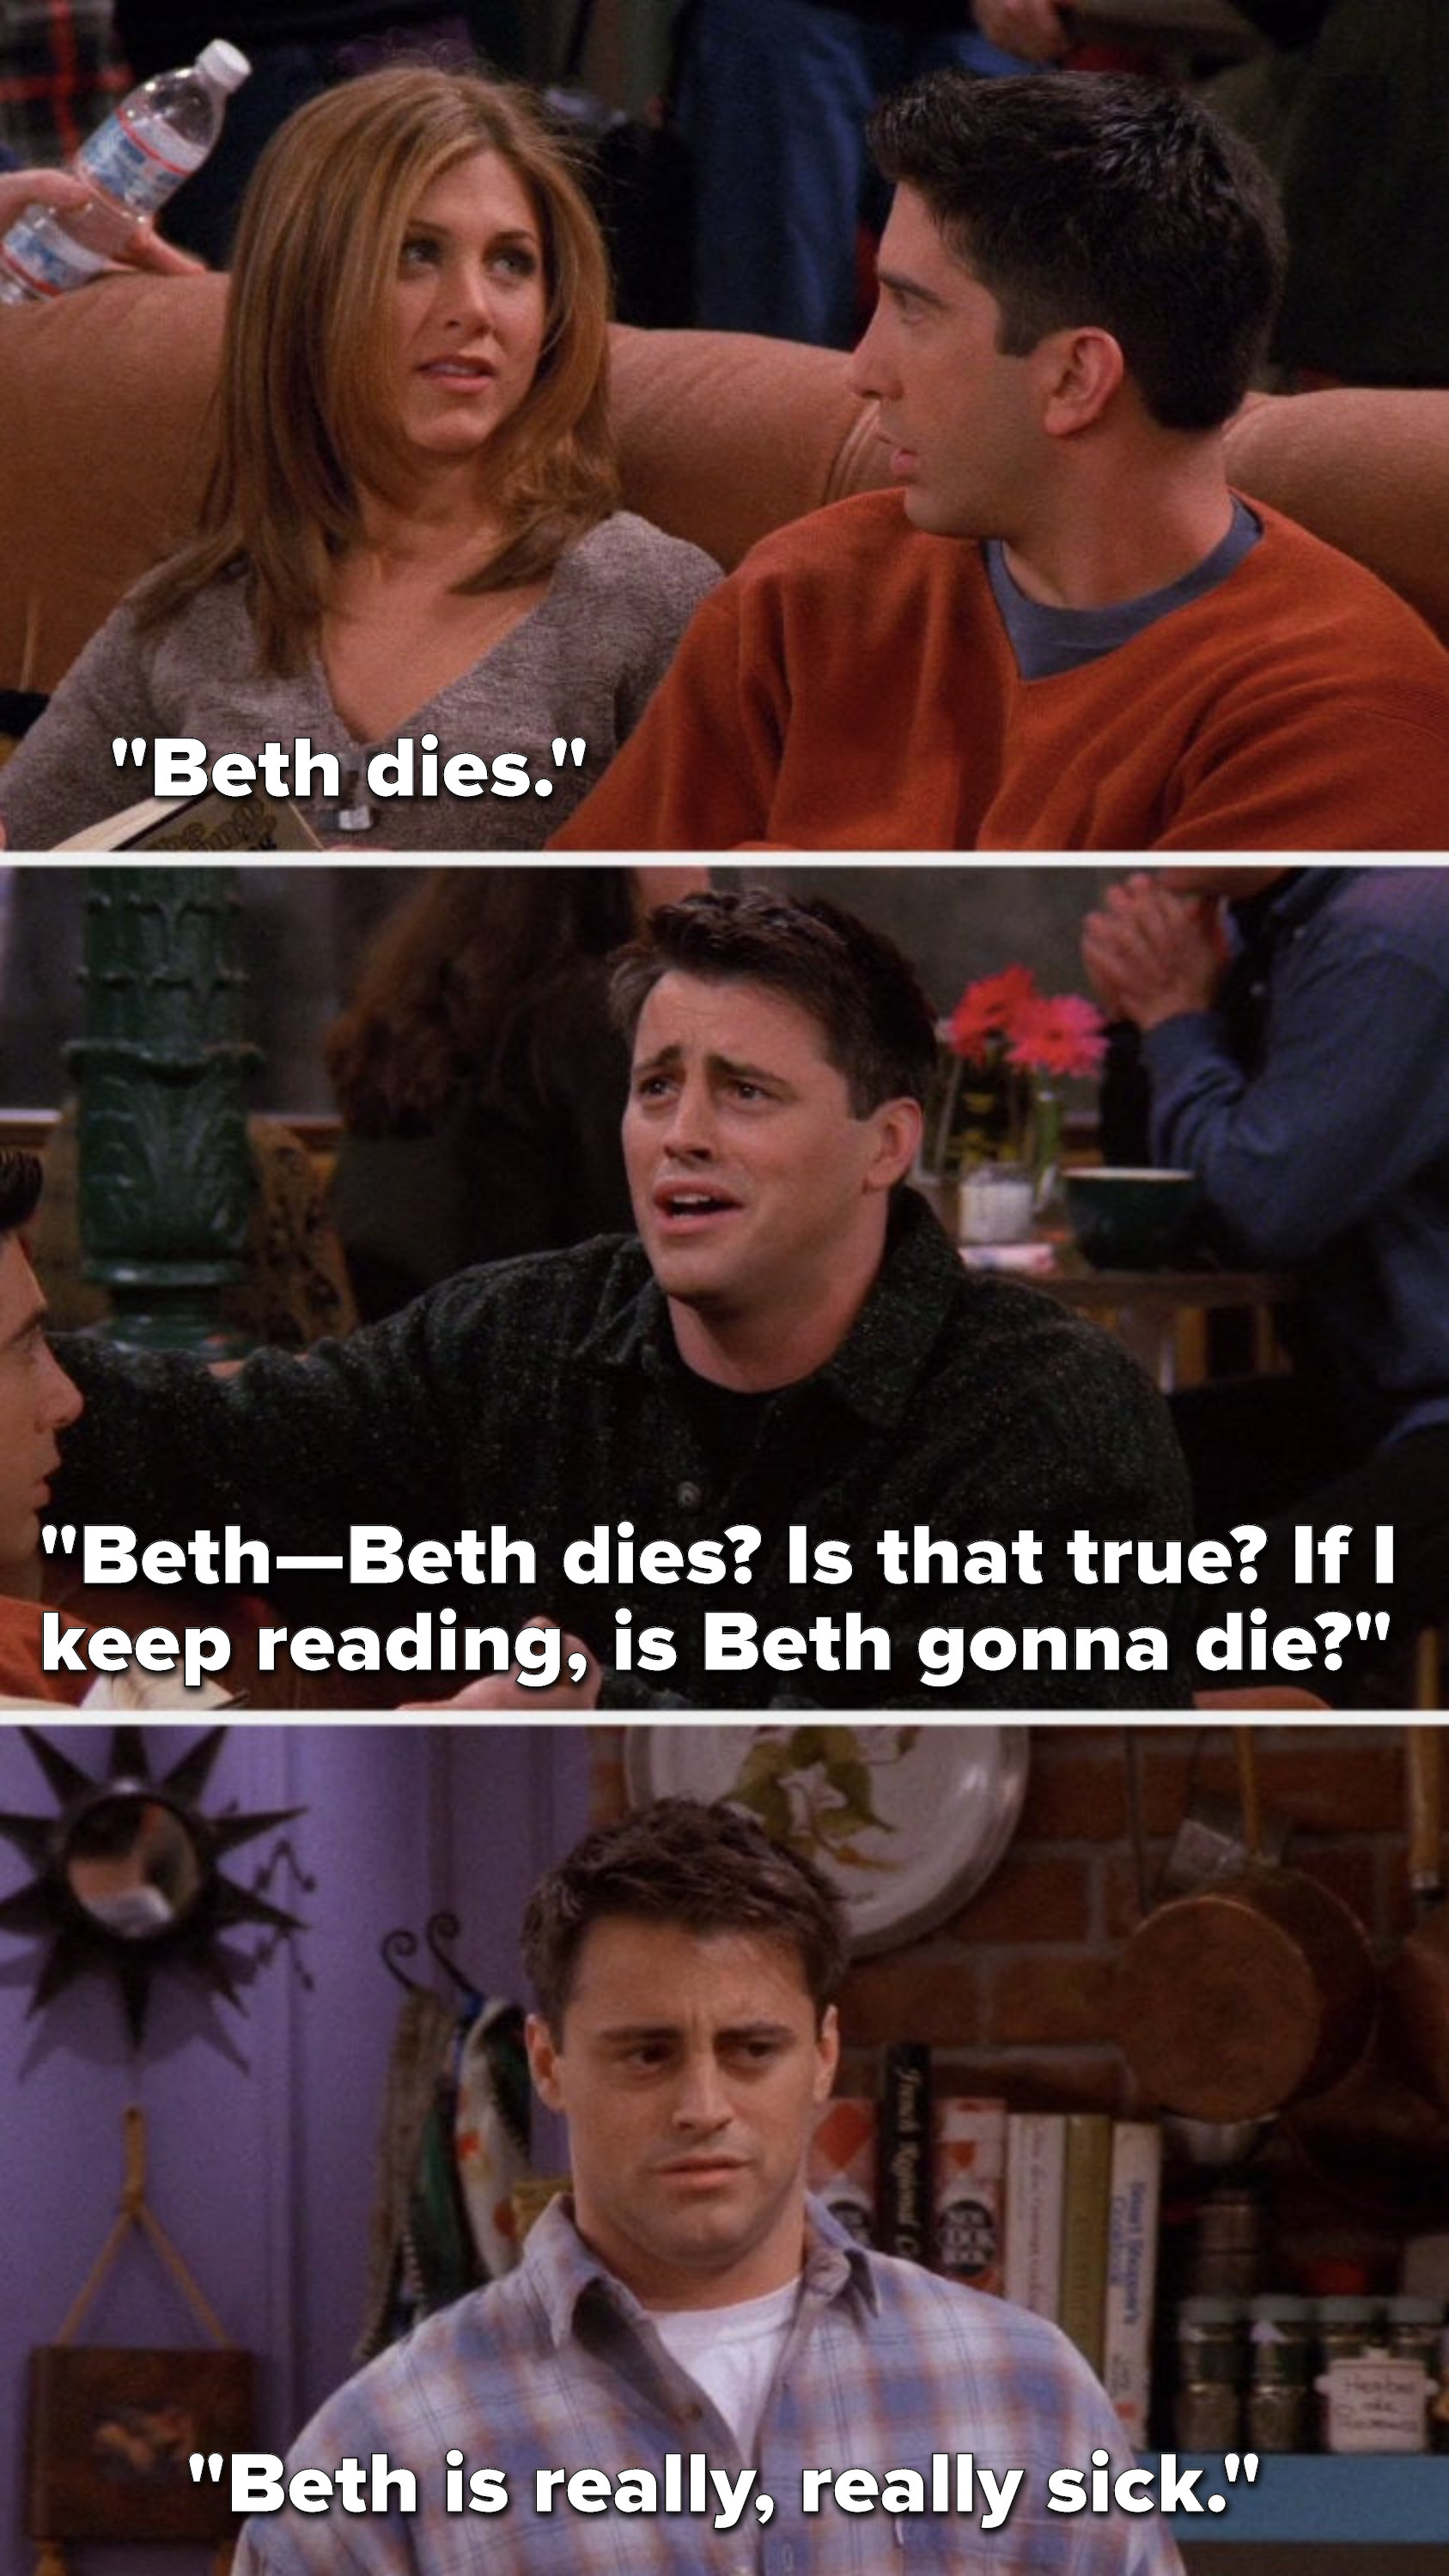 Rachel says, &quot;Beth dies,&quot; Joey says, &quot;Beth—Beth dies, is that true, if I keep reading, is Beth gonna die,&quot; and then later Joey says, &quot;Beth is really, really sick&quot;